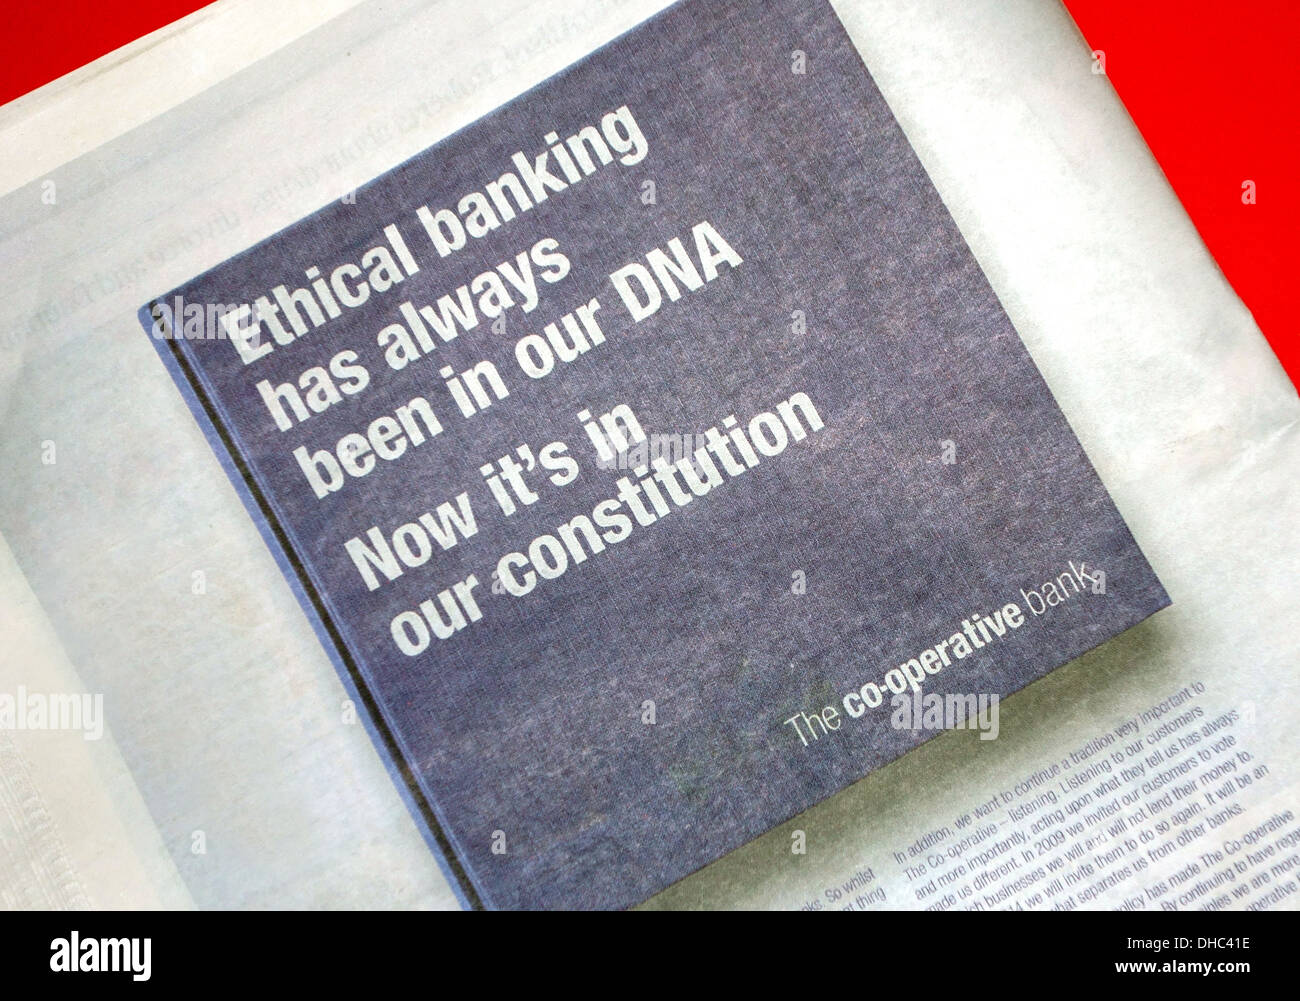 Co-operative Bank newspaper advert about ethical banking, London Stock Photo